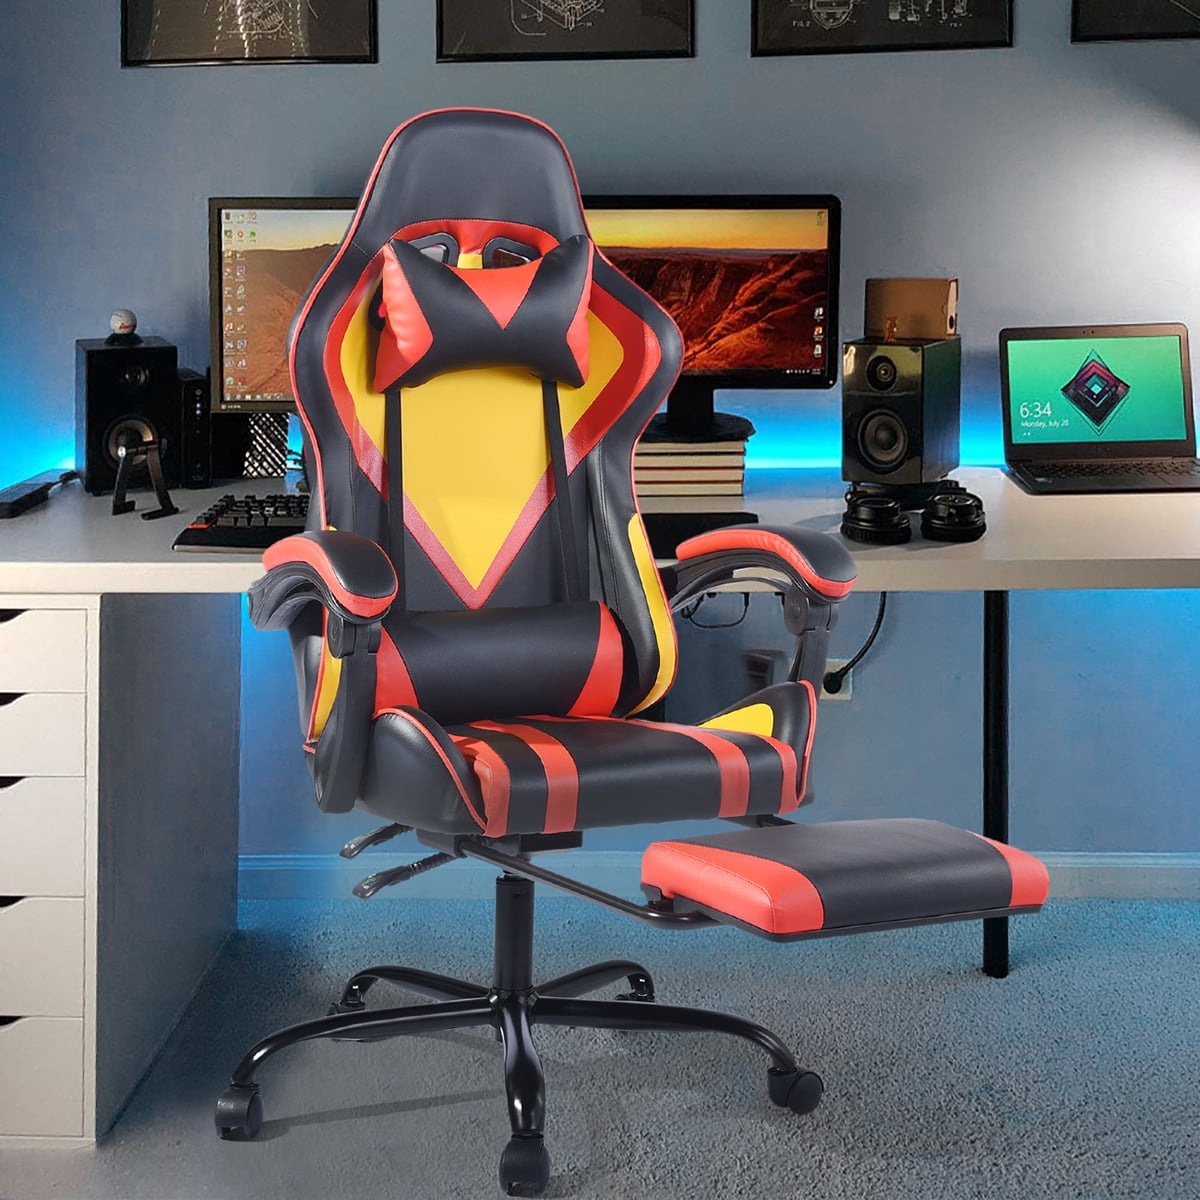 Ergonomic Gaming Chairs For PC Gamers